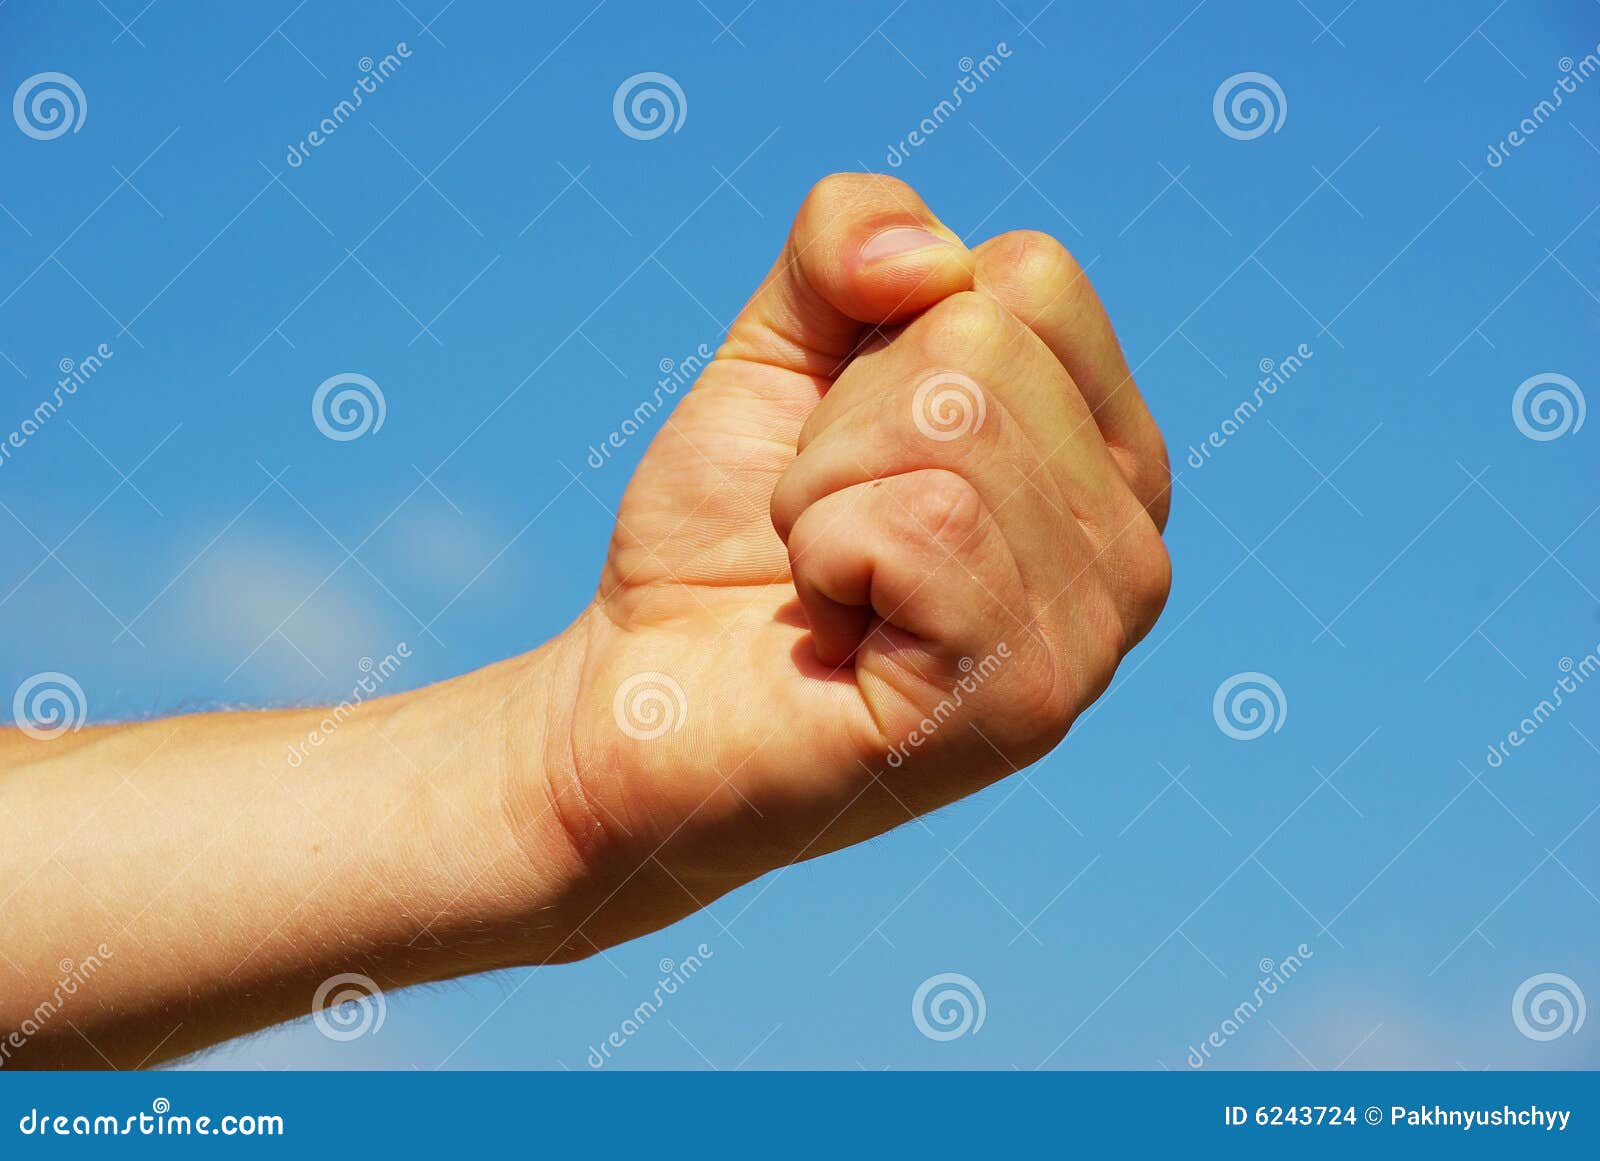 Clenched fist stock photo. Image of energy, demonstration - 6243724